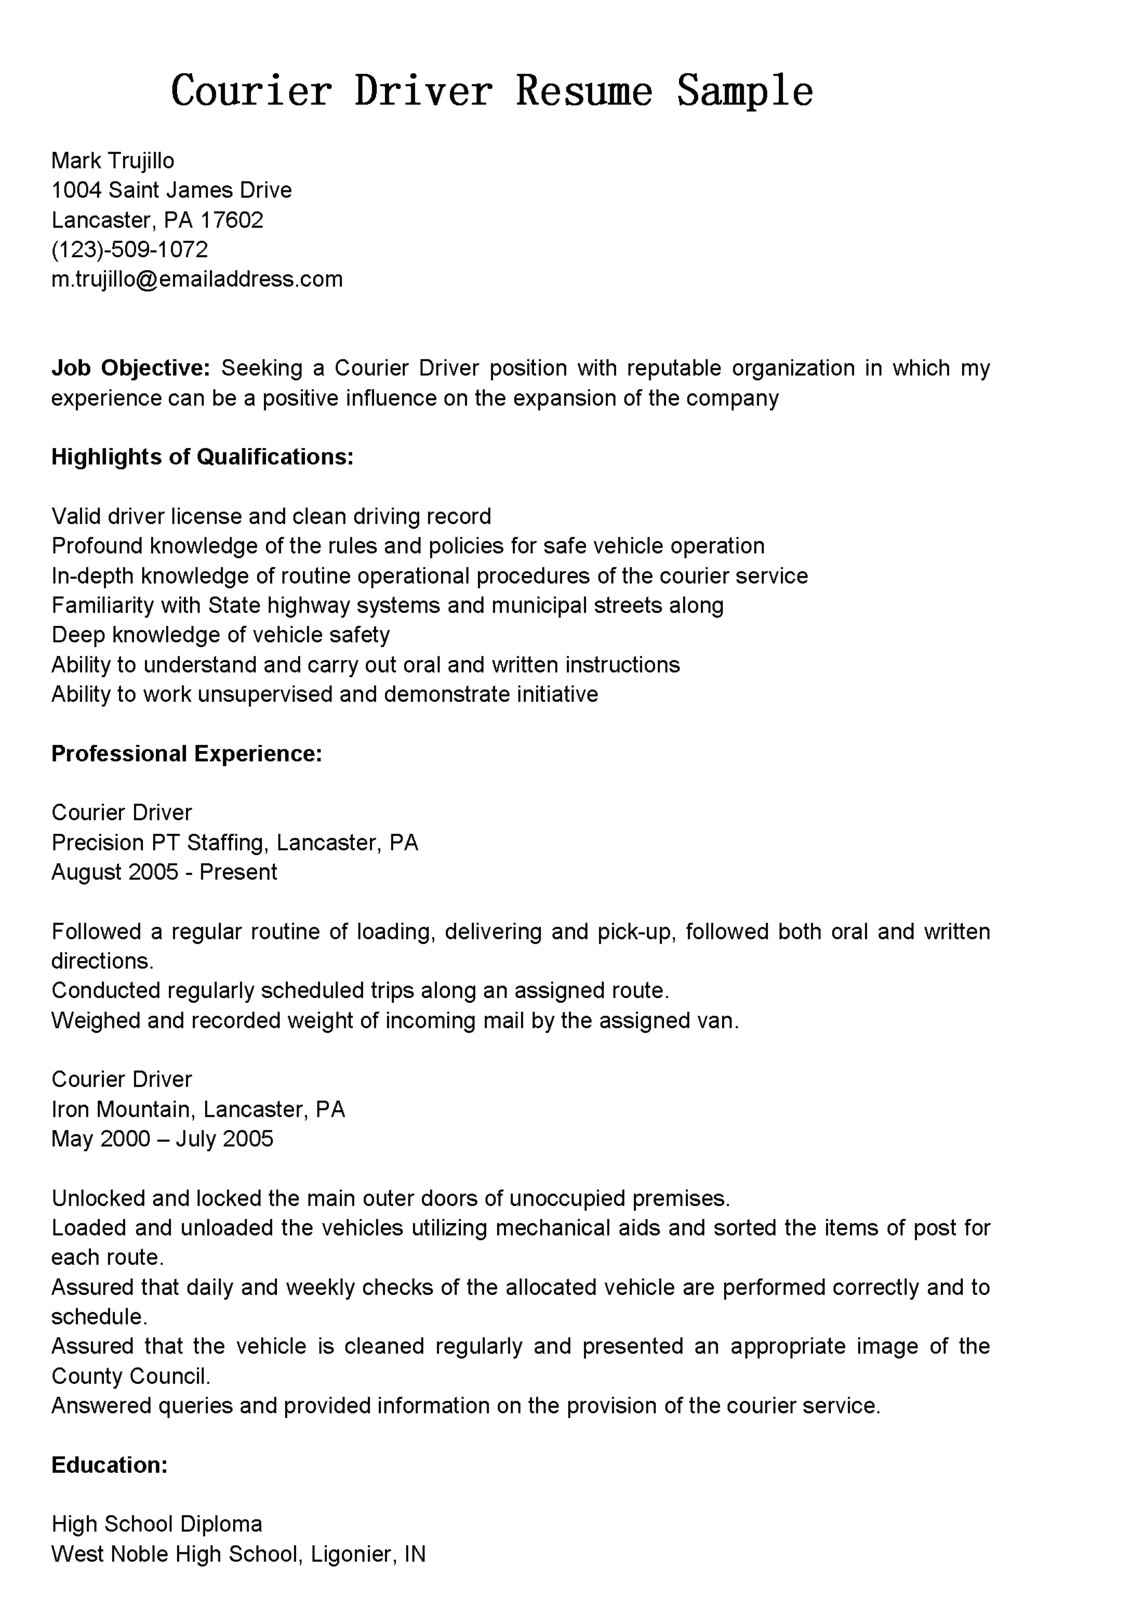 Courier Driver Resume Sample Driver Resumes Courier Driver Resume Sample